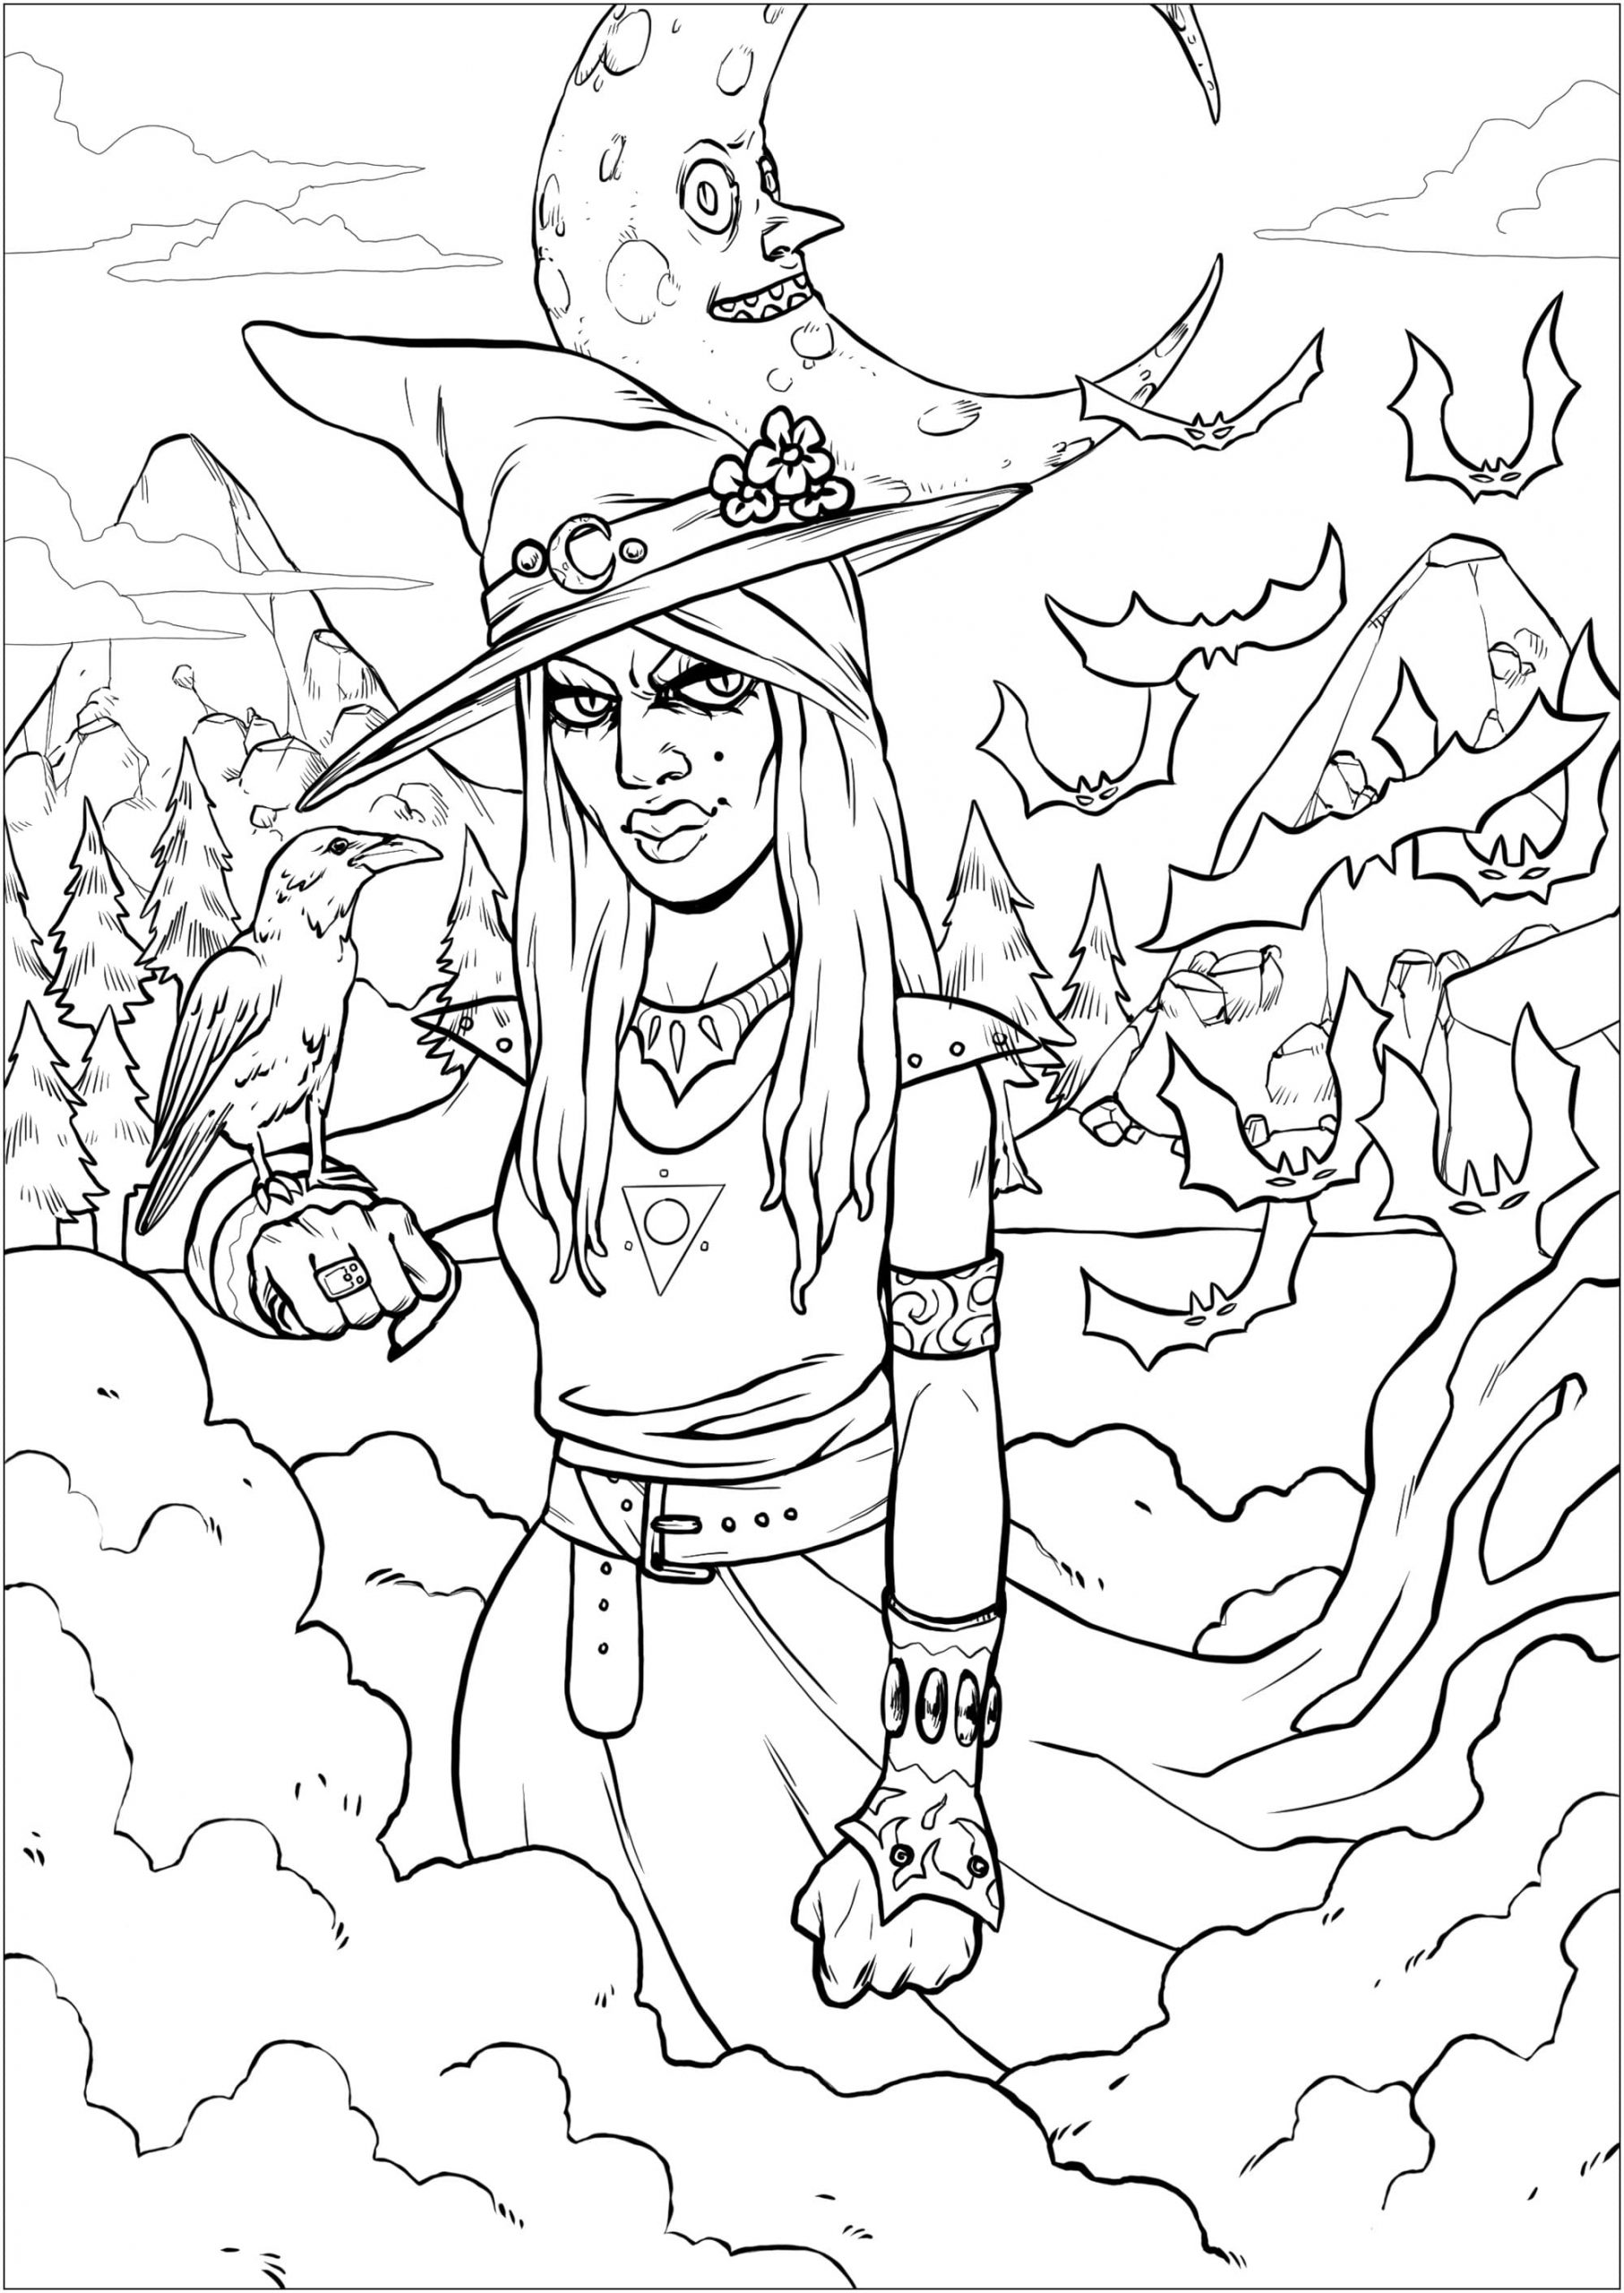 Couple Of Vampires For Children Coloring Page